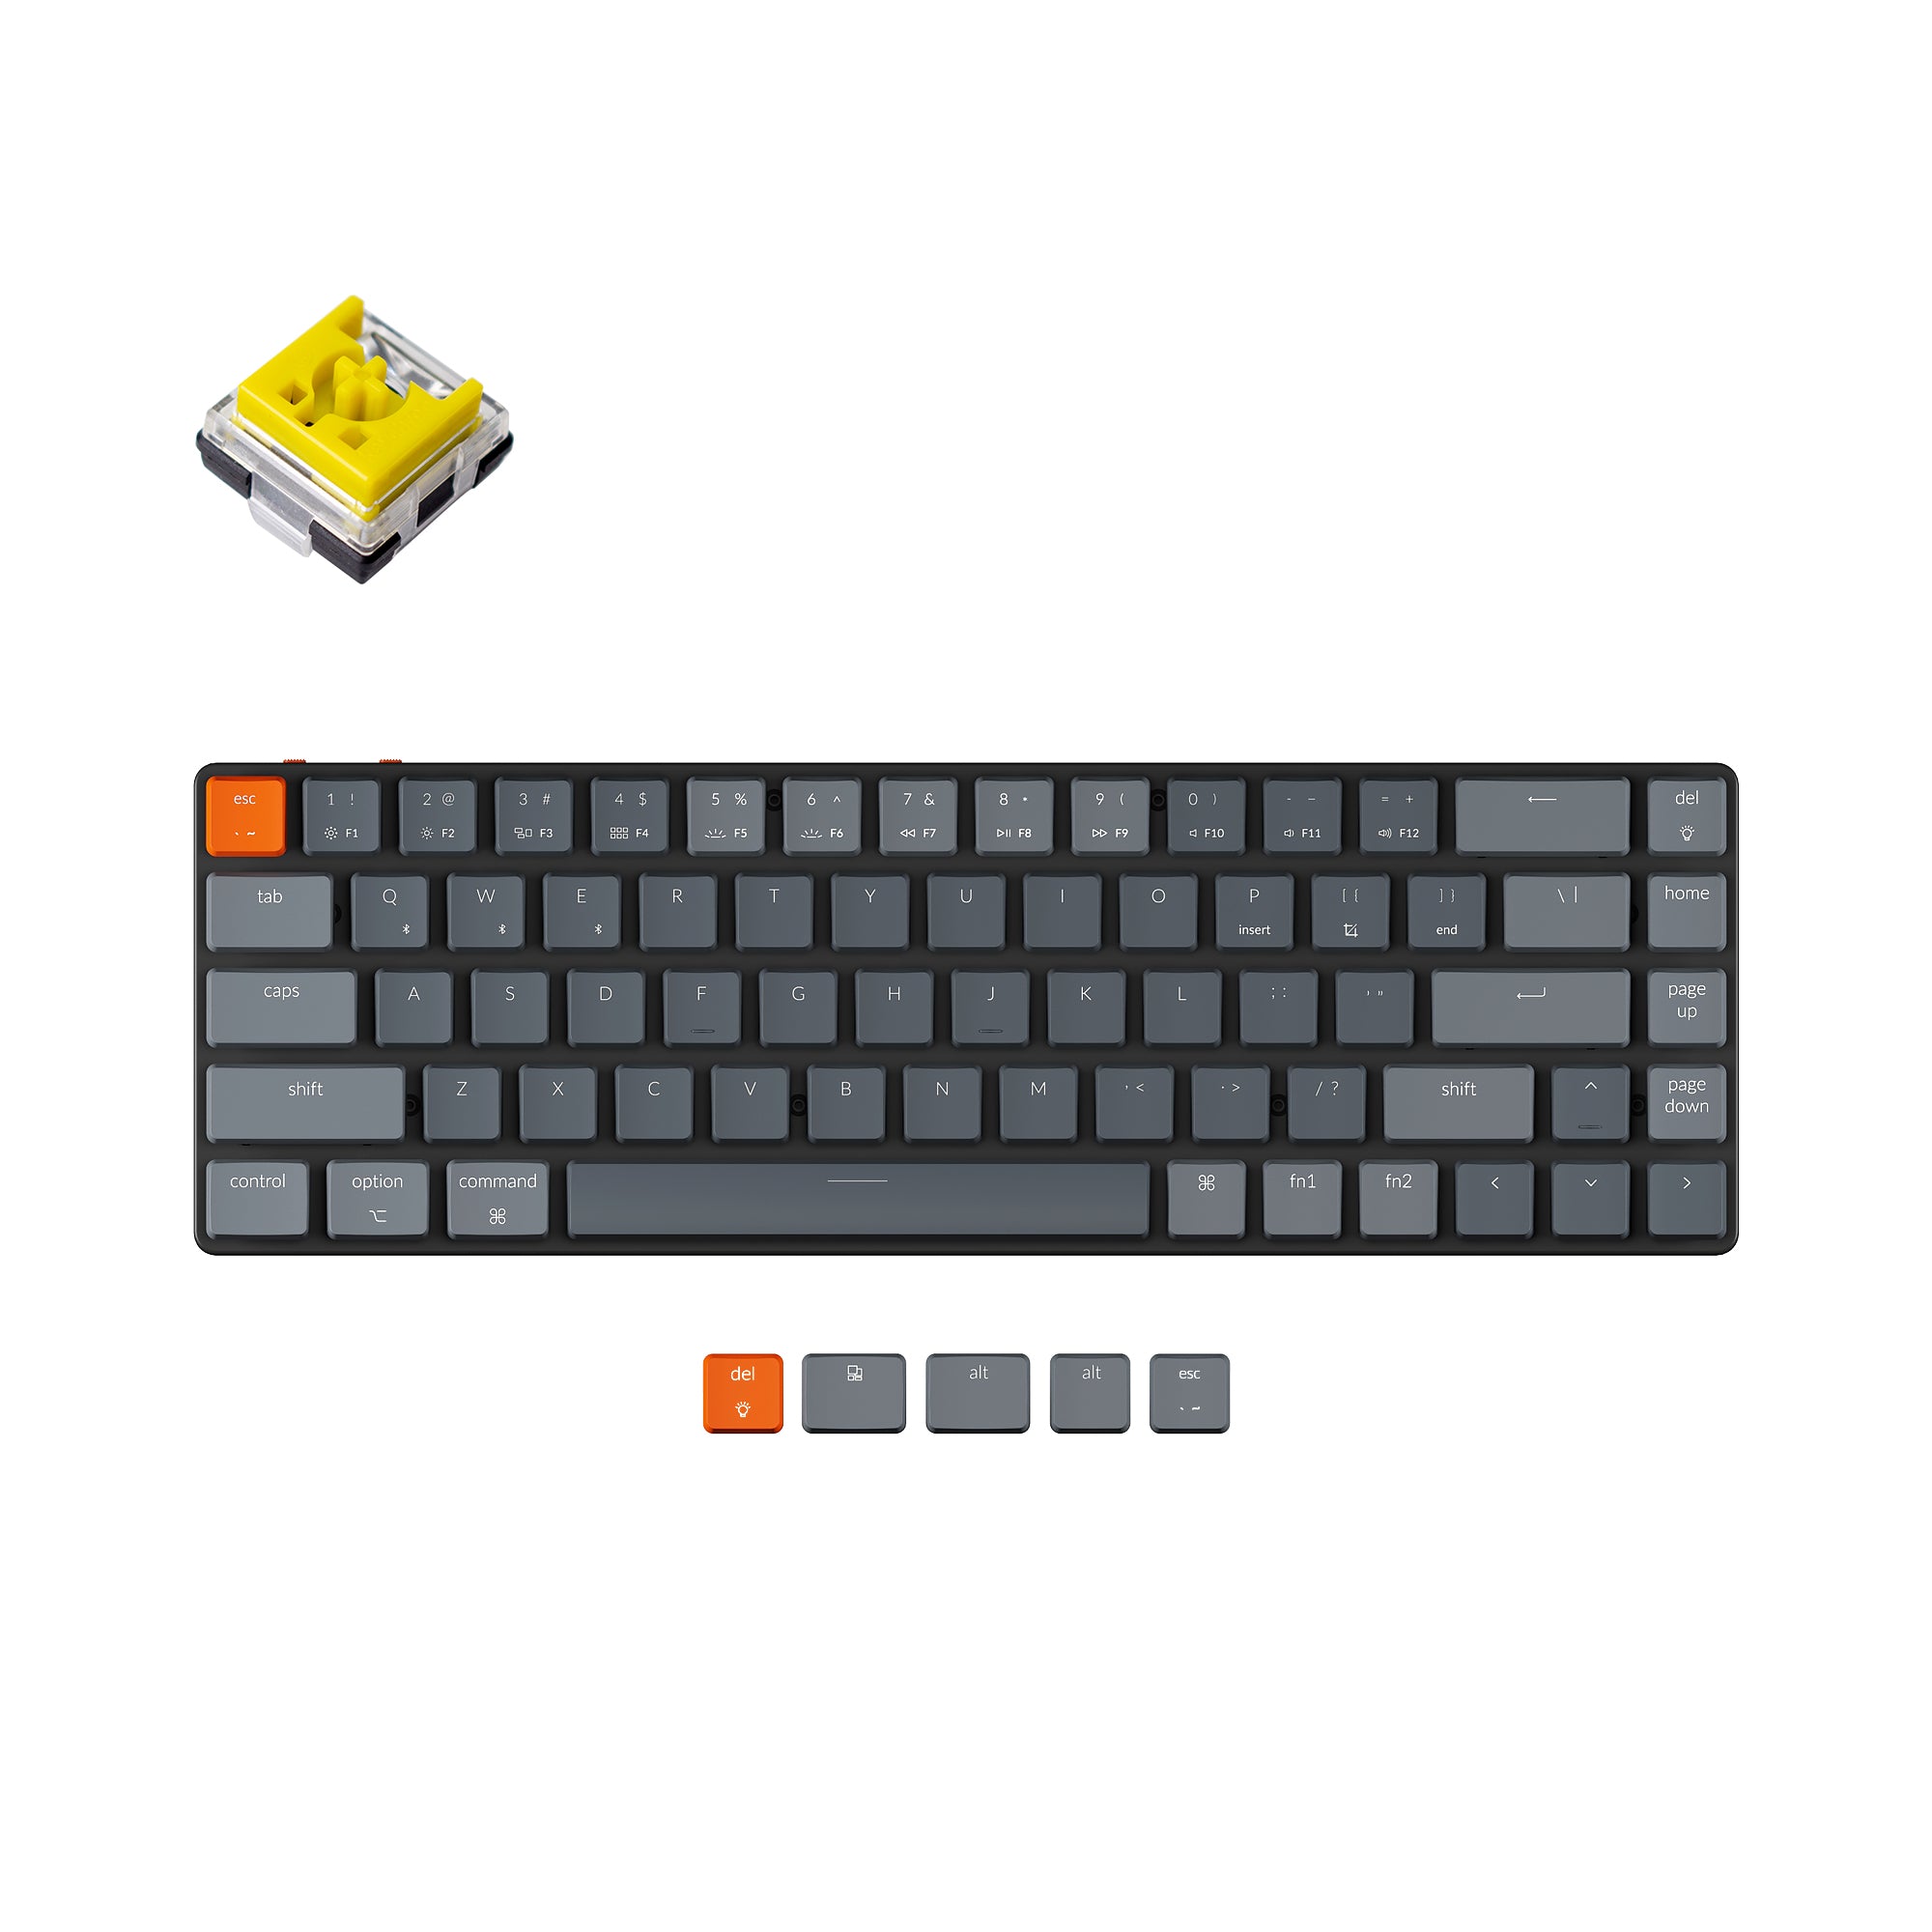 Keychron K7 65-percent ultra-slim compact wireless mechanical keyboard for Mac Windows Hot-swappable low-profile Keychron Optical banana switches with RGB backlit